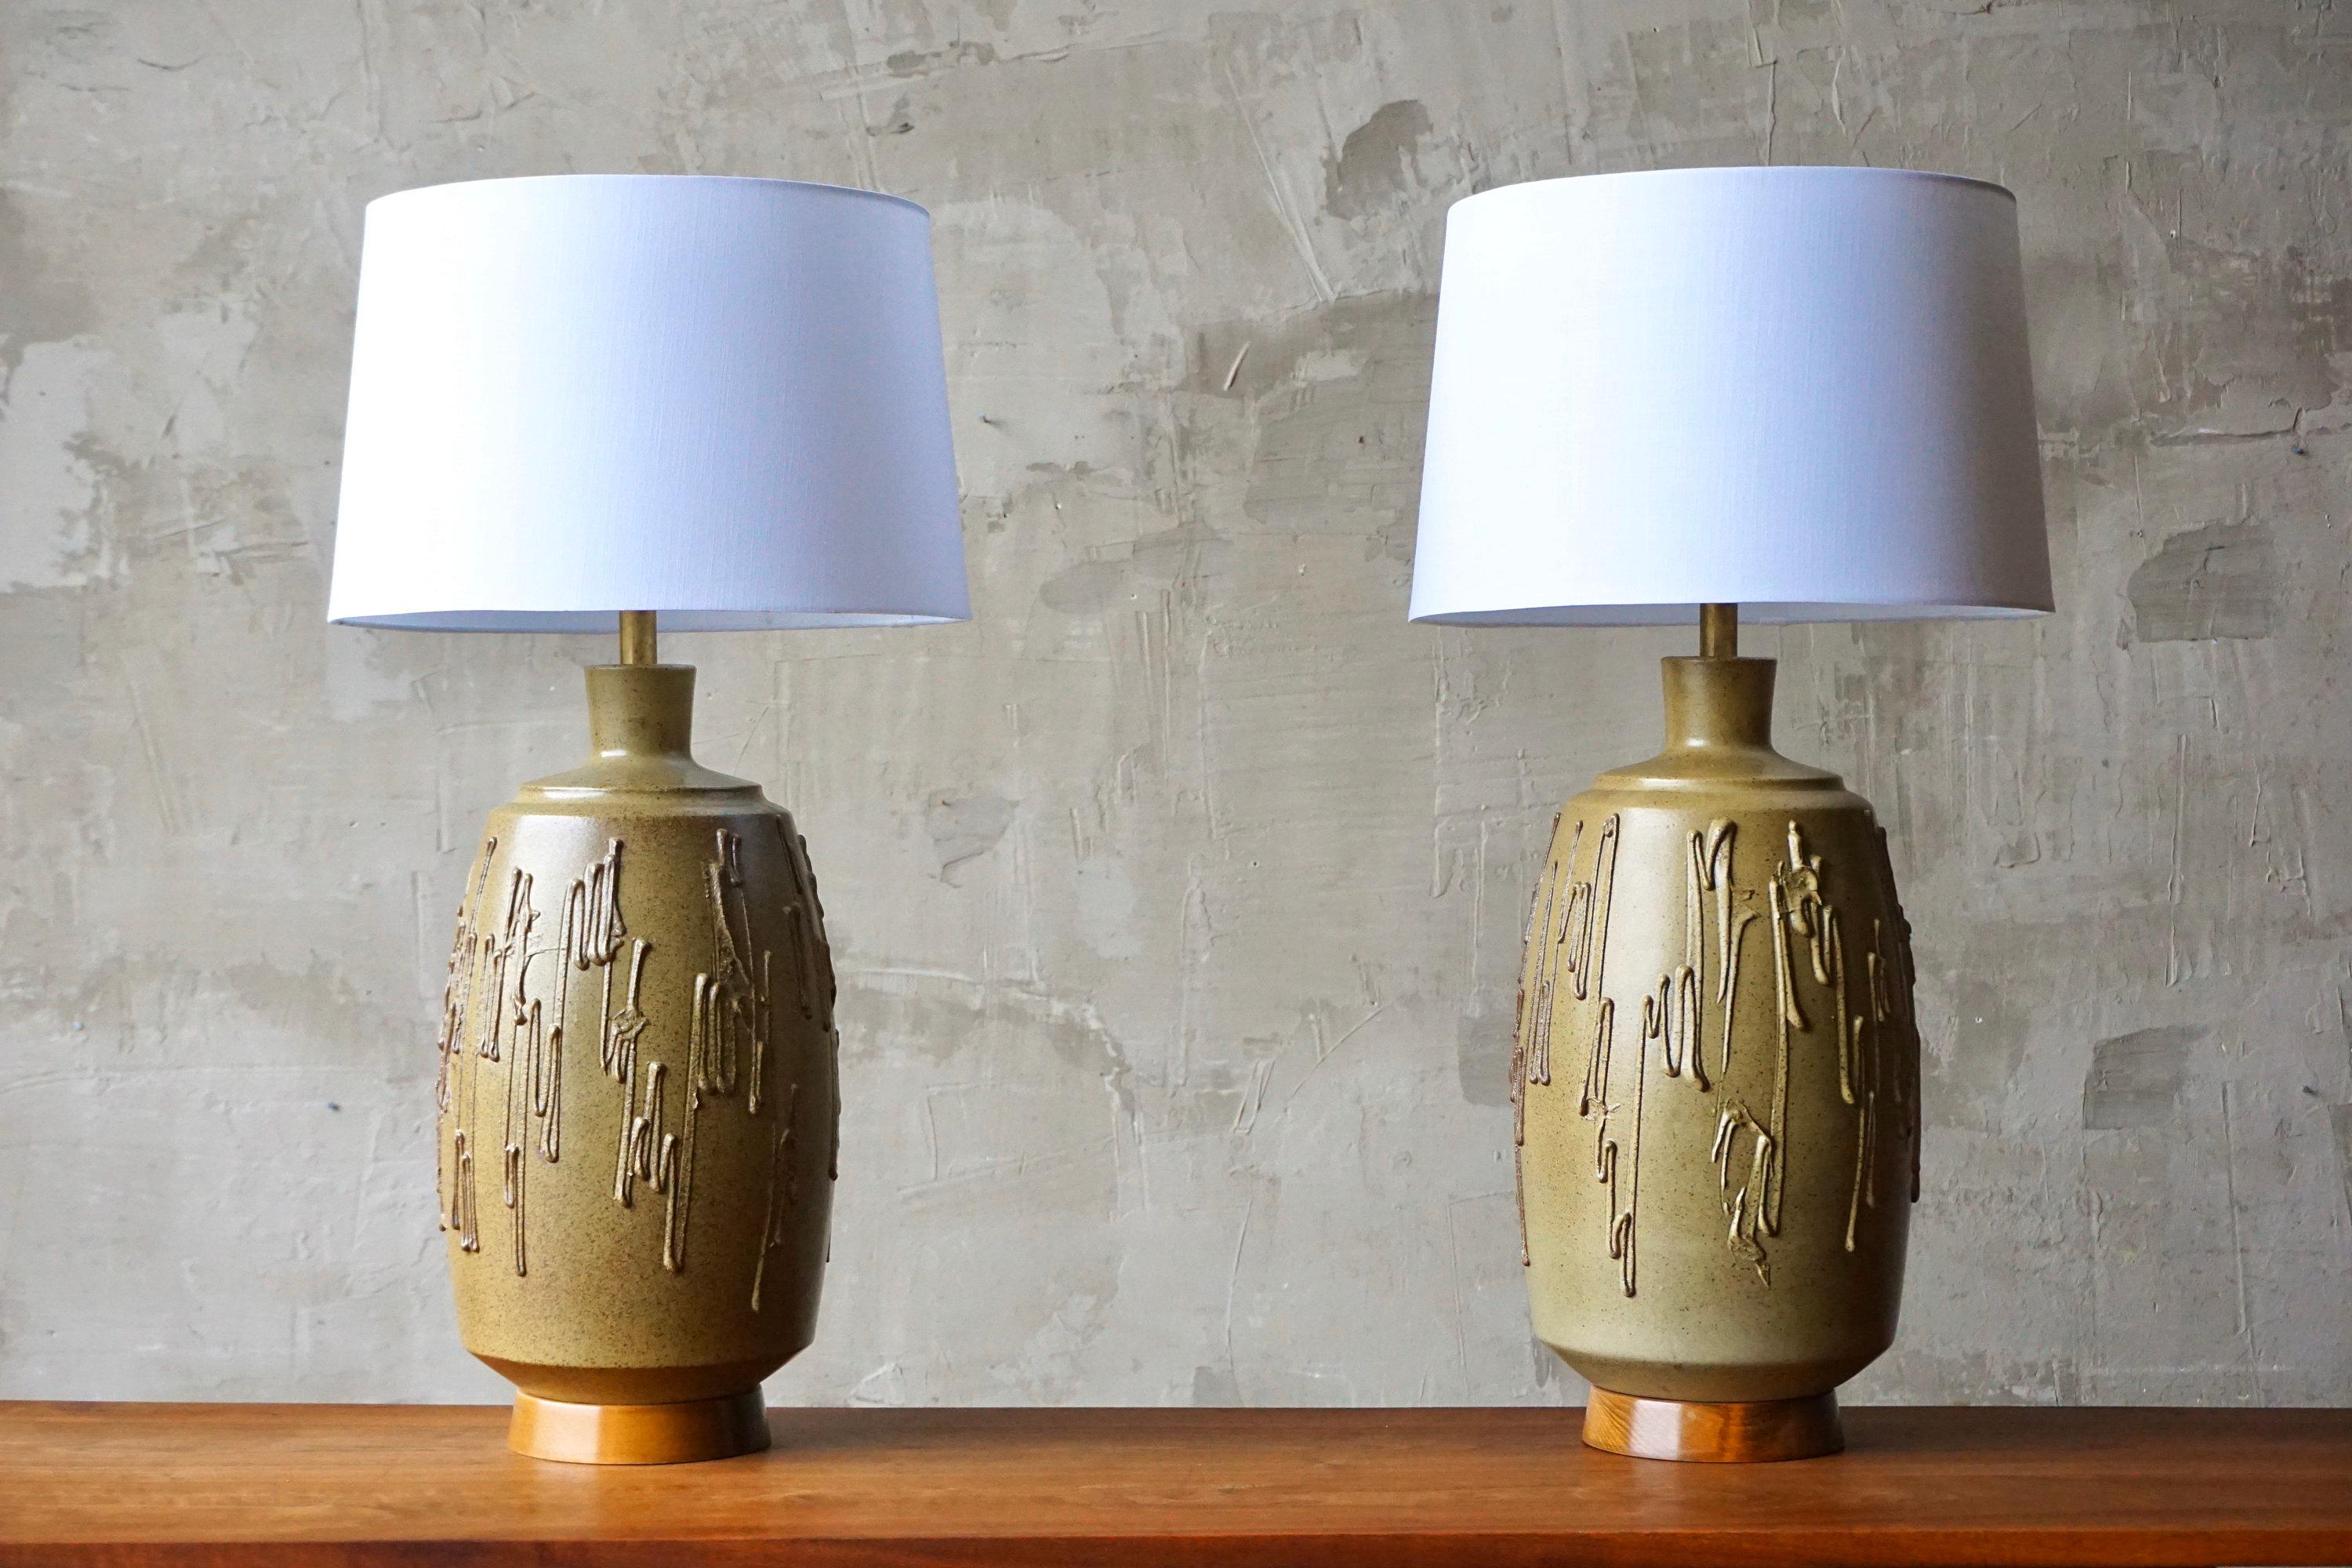 Large David Cressey Ceramic Table Lamps In Excellent Condition For Sale In Merced, CA